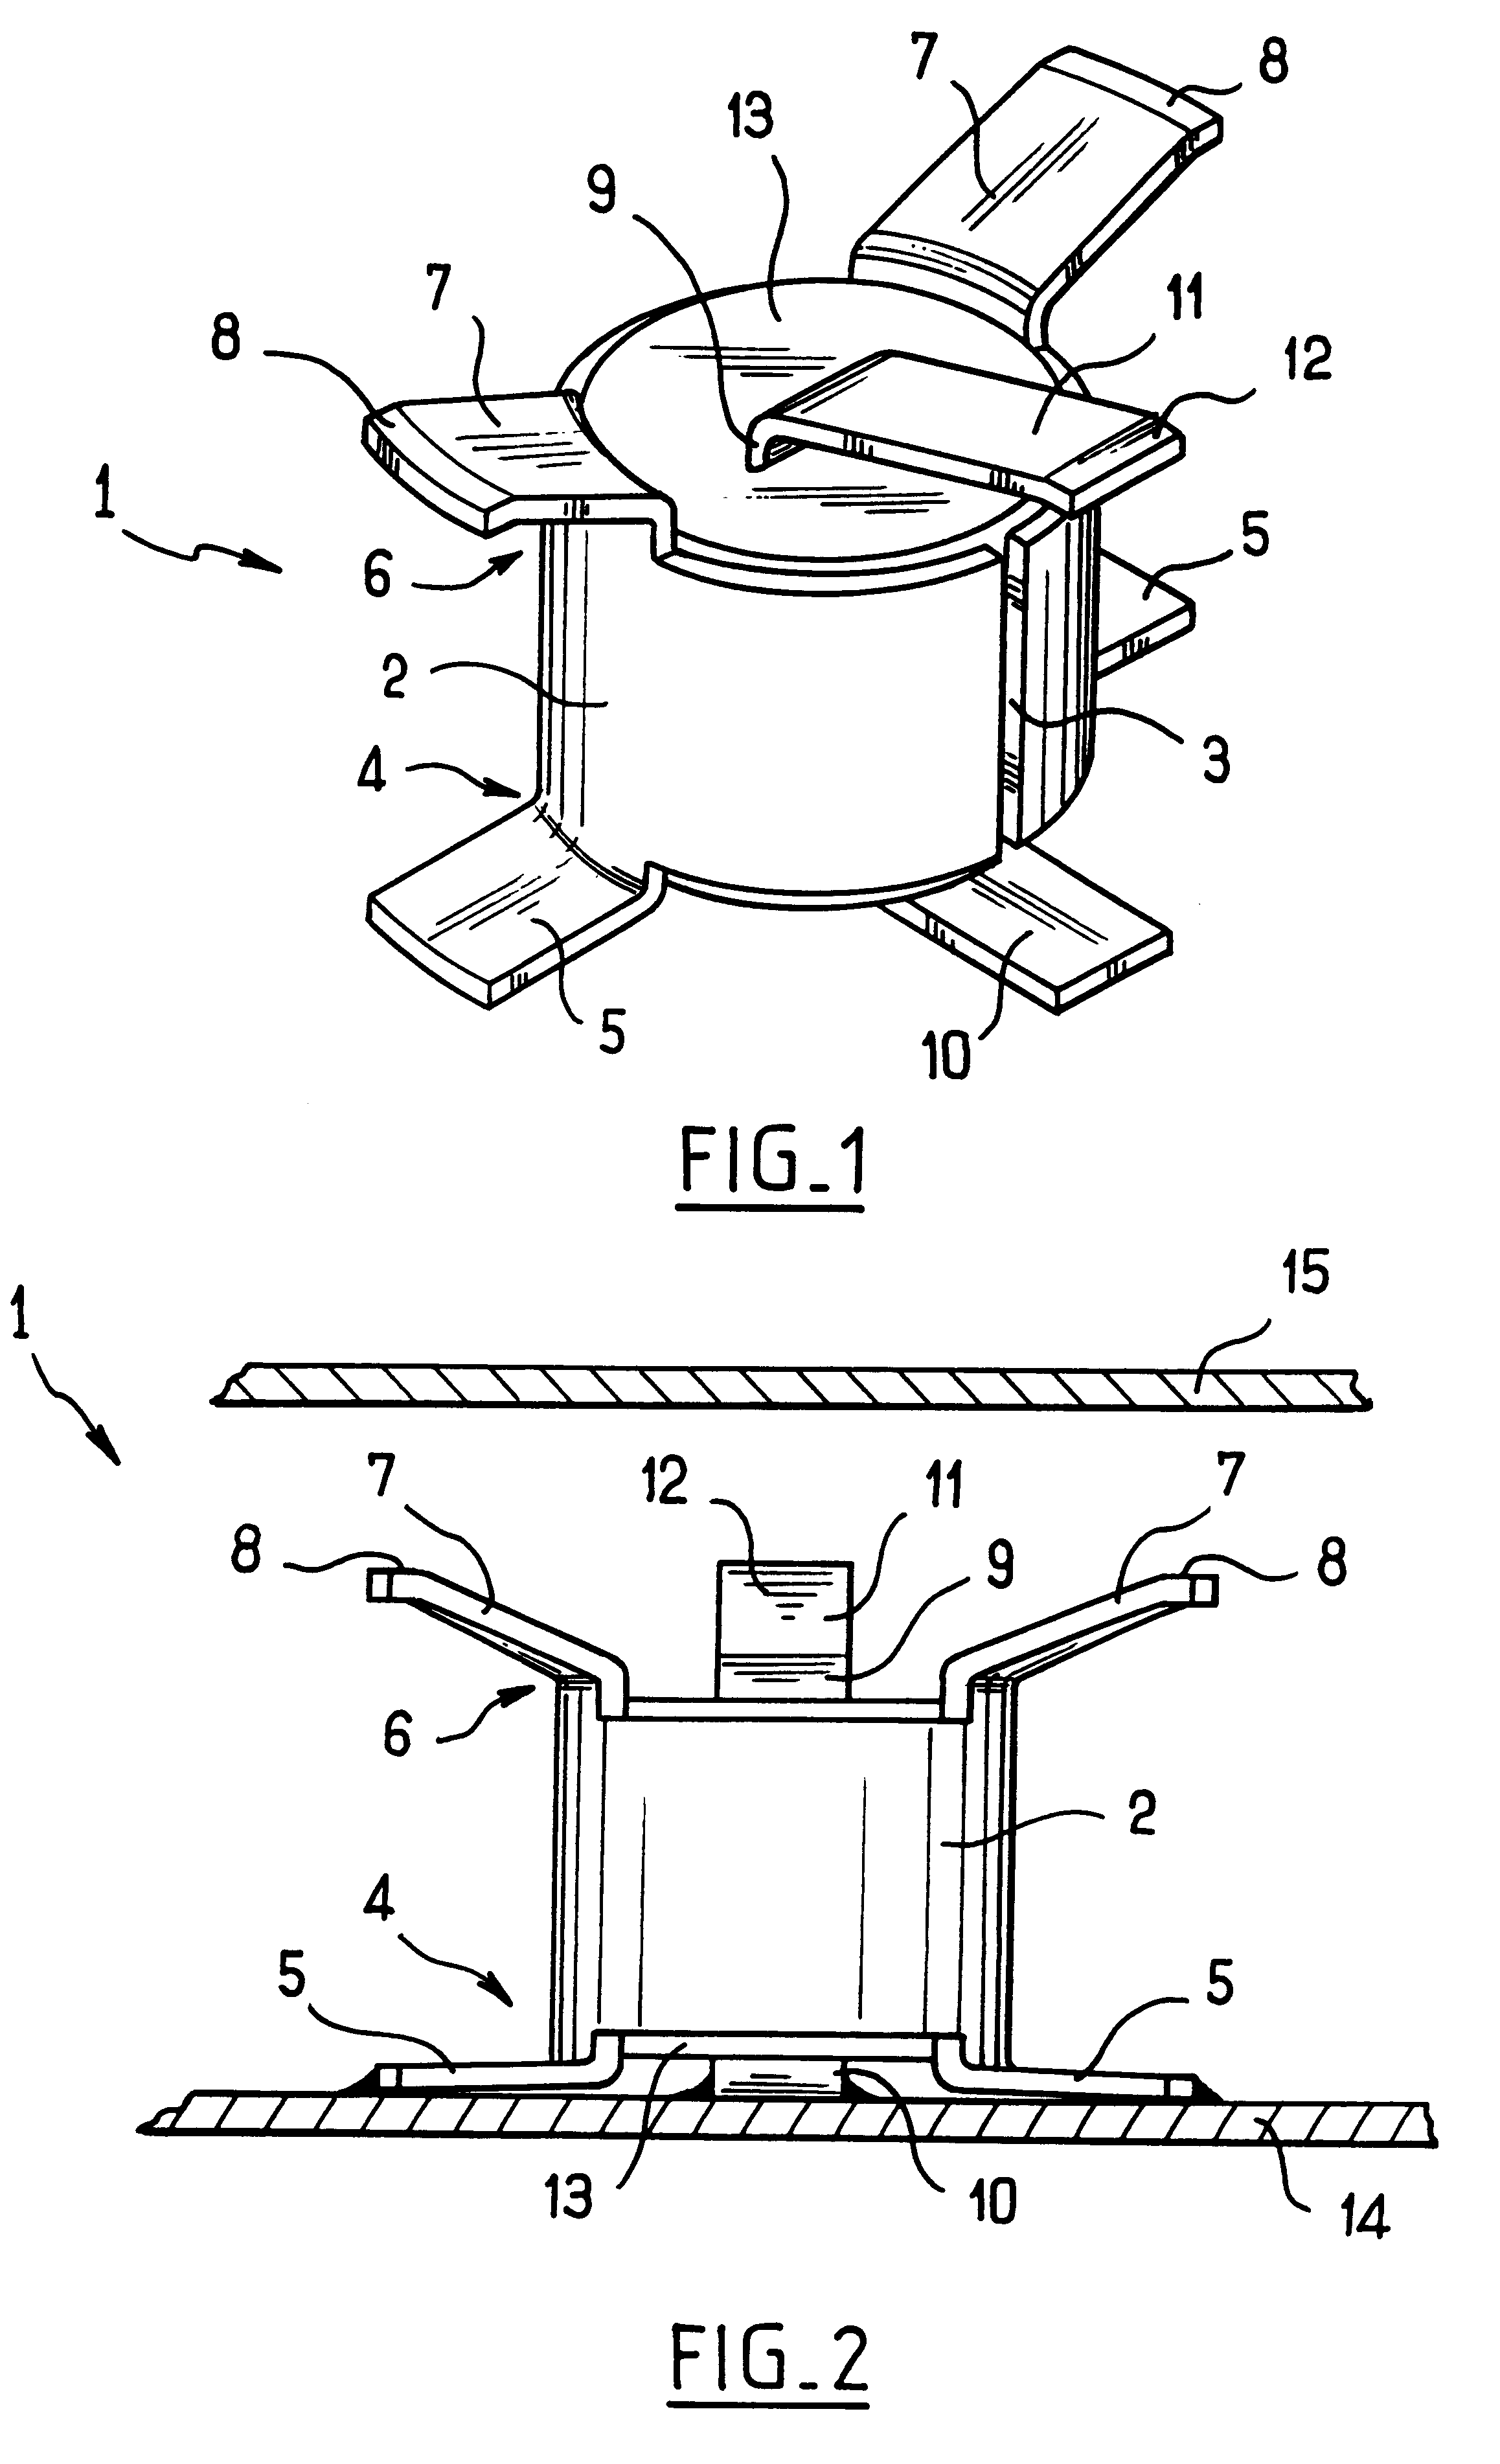 Coaxial coupling for interconnecting two printed circuit cards